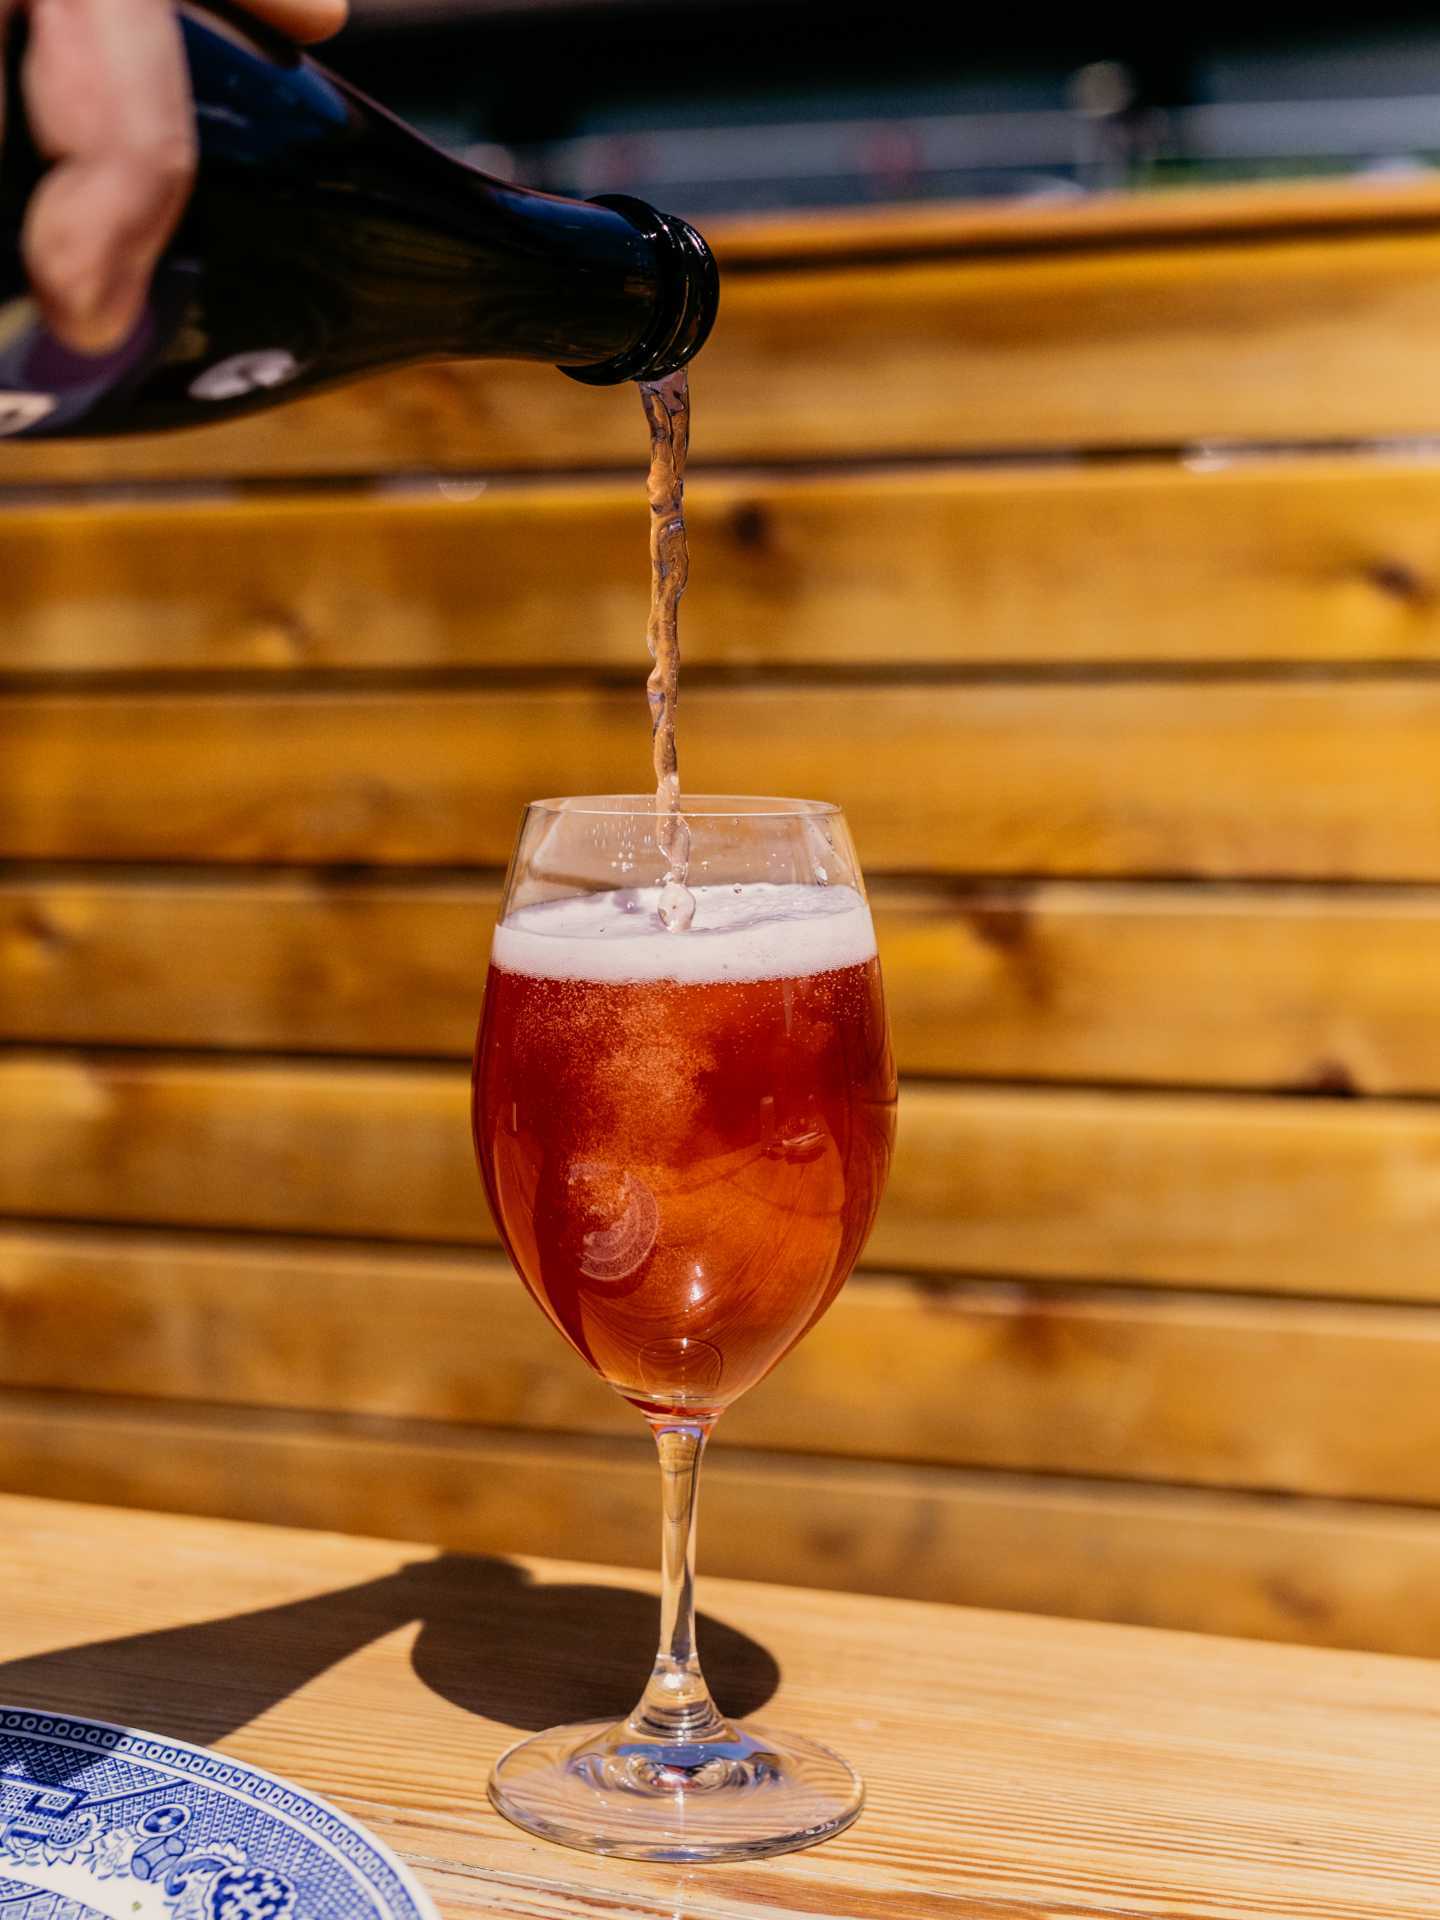 Toronto breweries | A drink being poured at Burdock Brewery